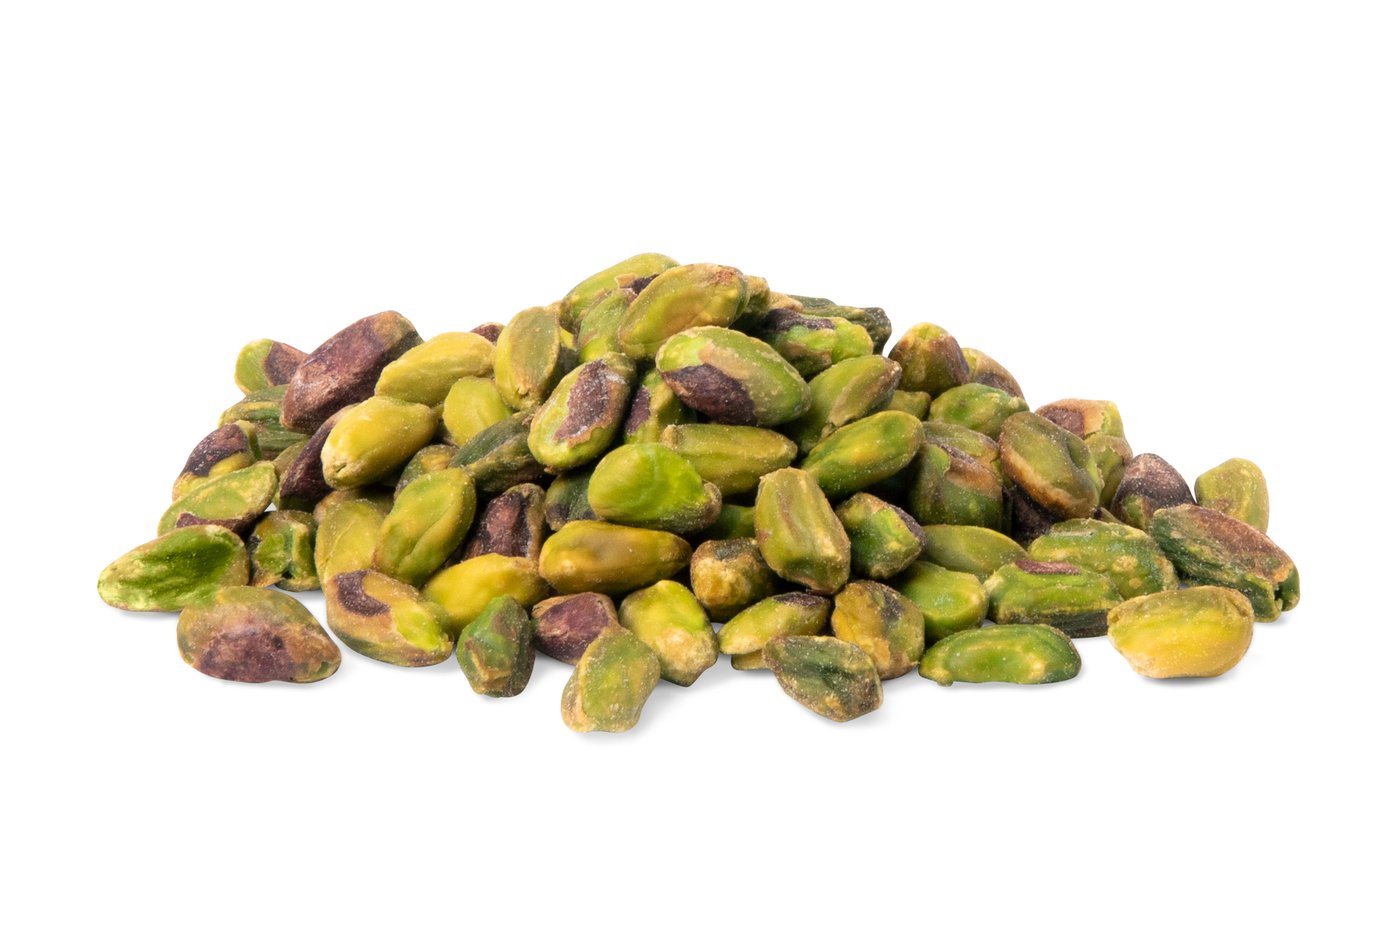 Roasted Pistachios (Salted, No Shell) photo